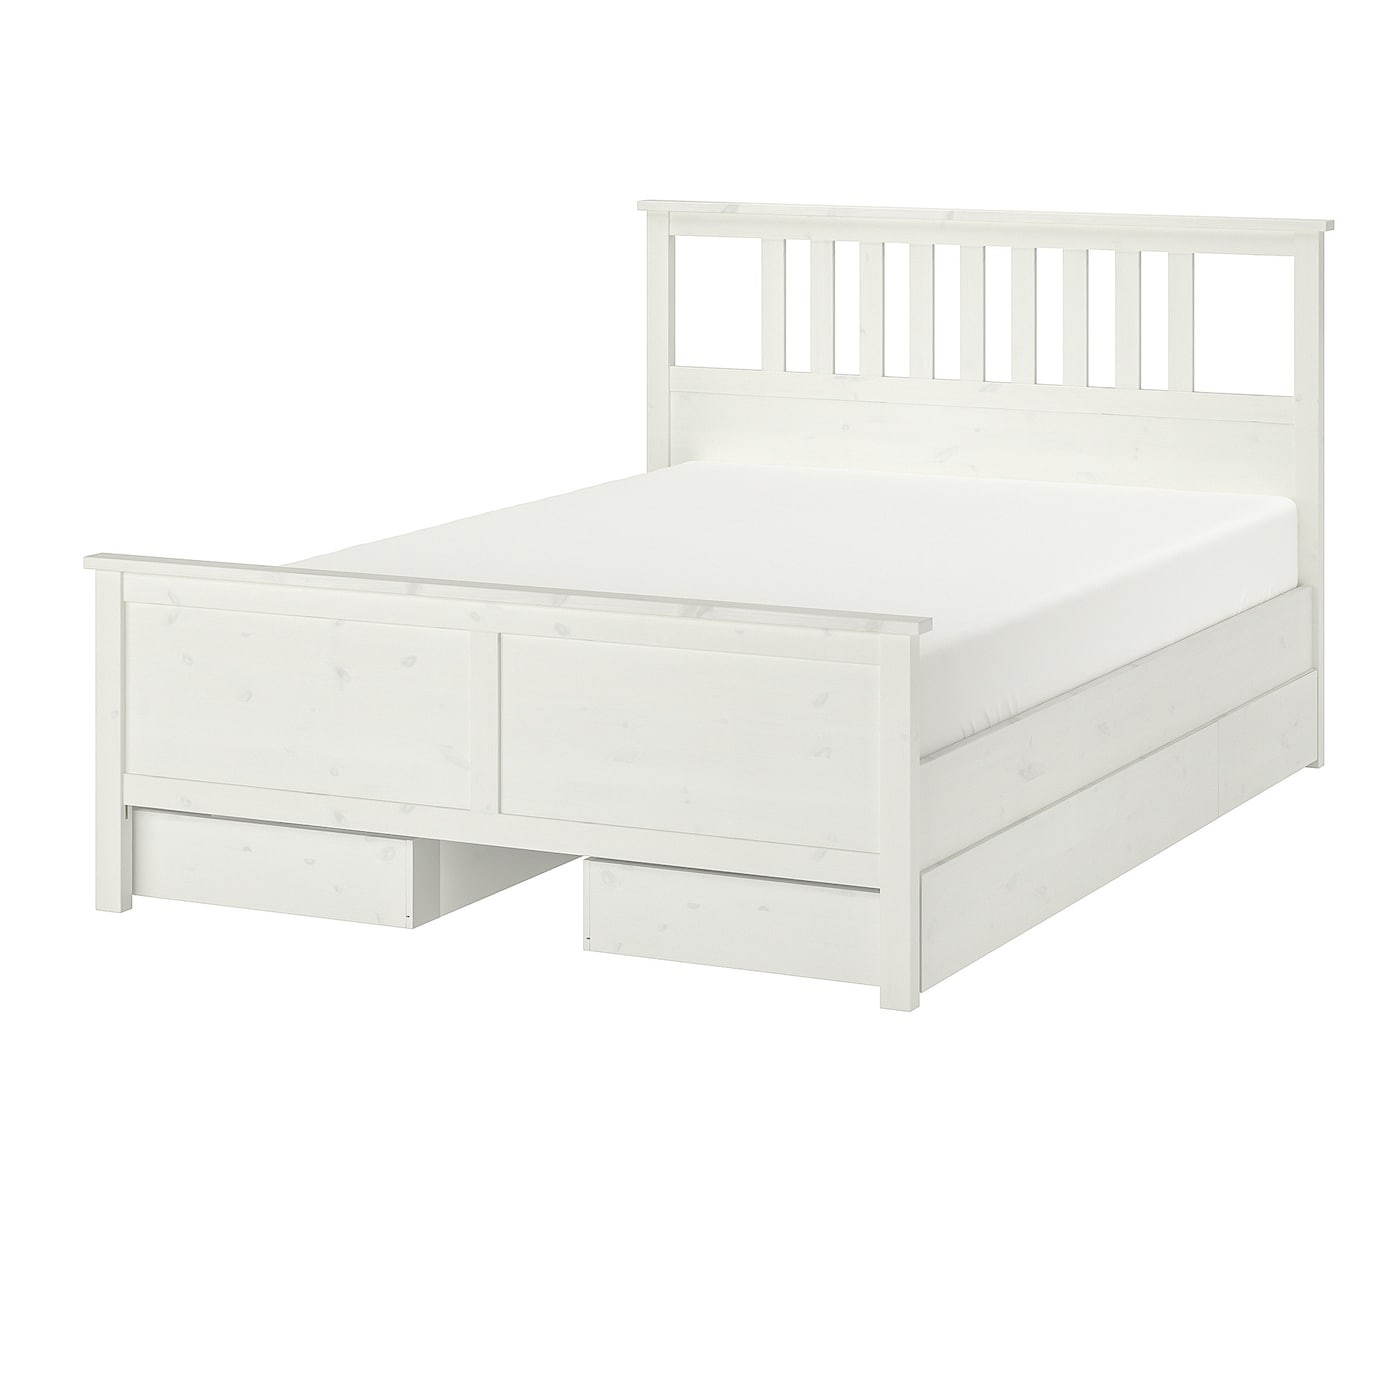 HEMNES Bed frame with 4 storage boxes